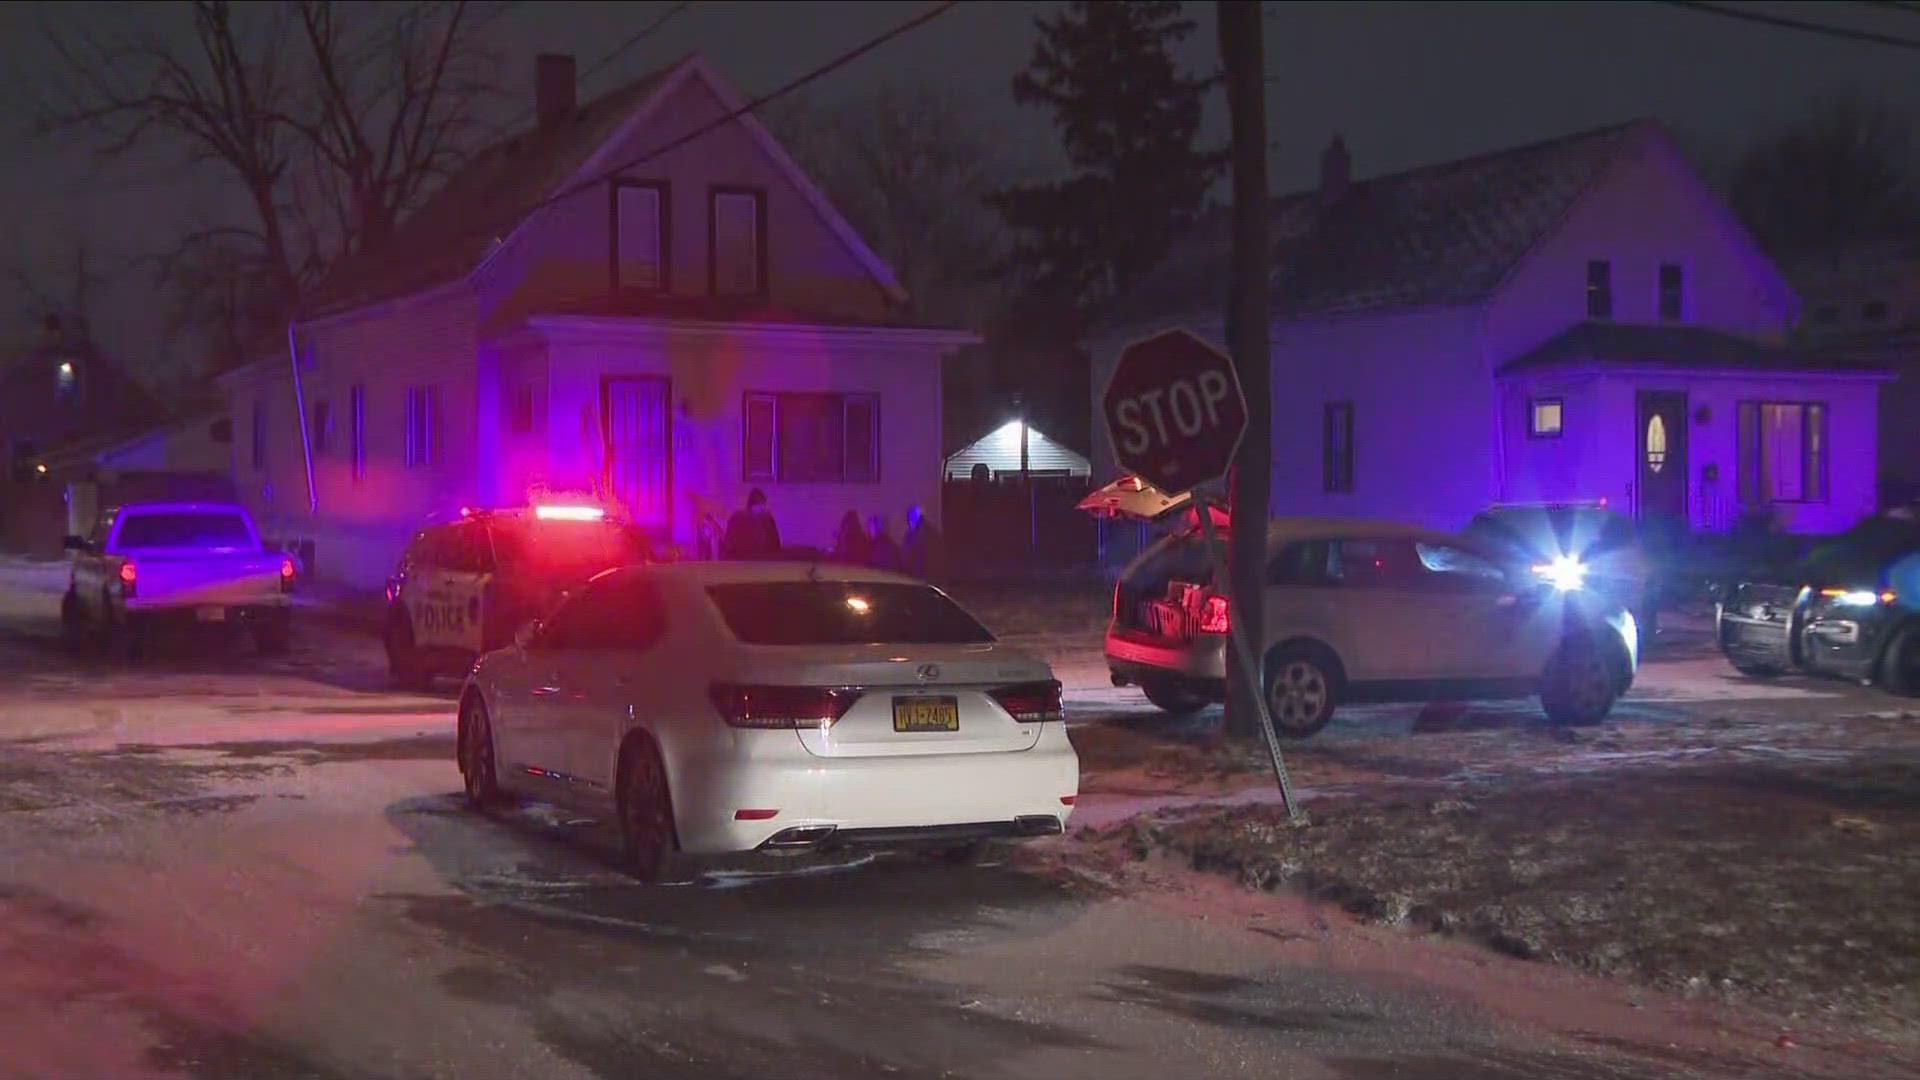 BPD says a 37-year-old man was shot on Sprenger Avenue Saturday night